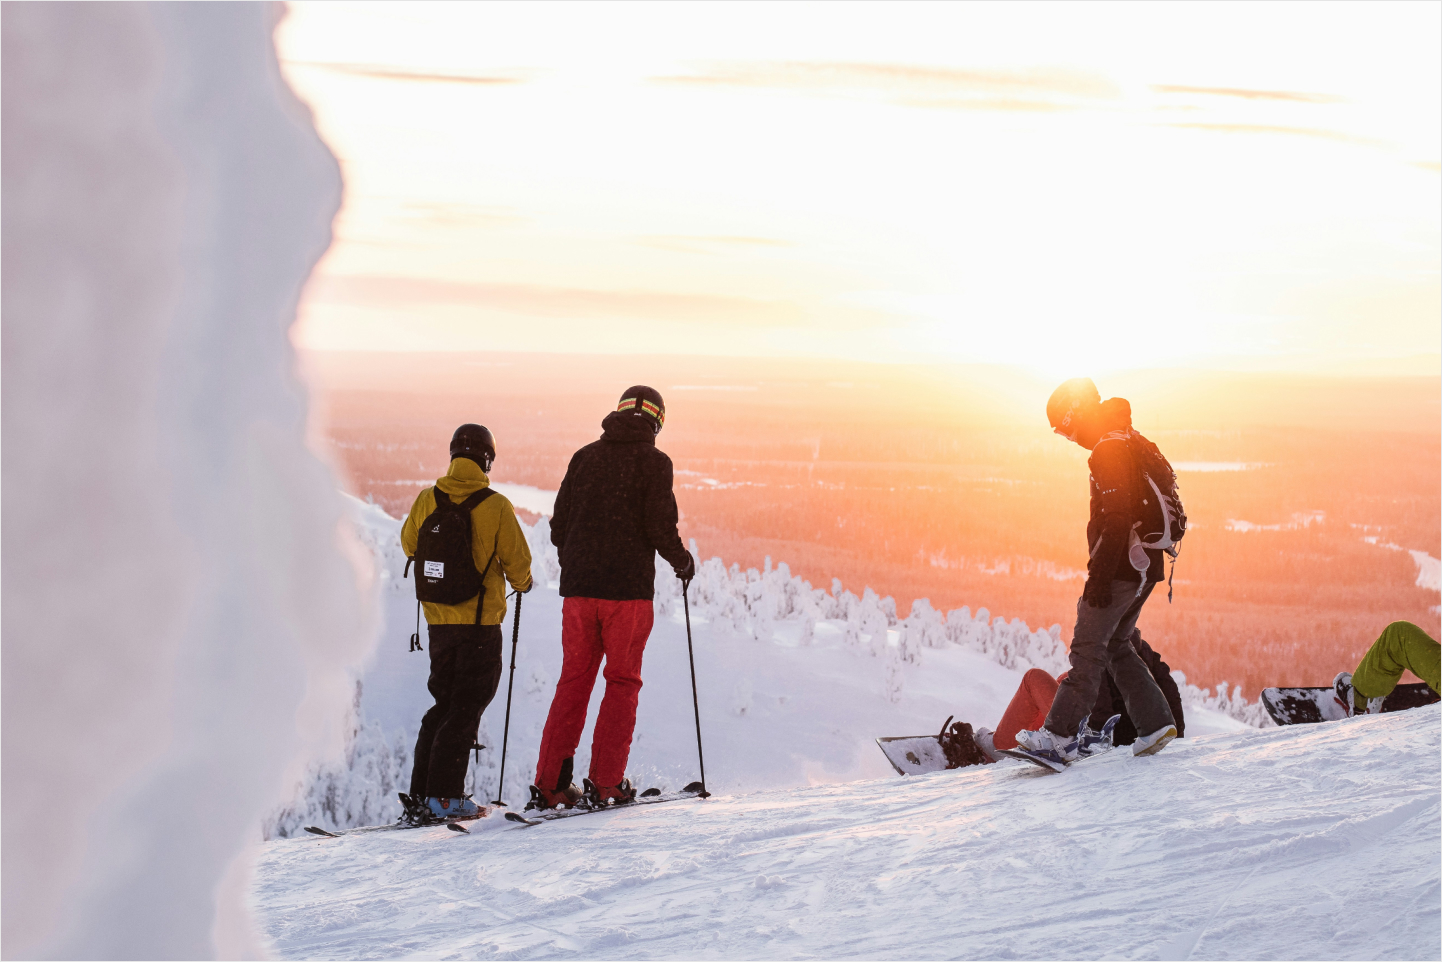 Three skiers on top of a mountain